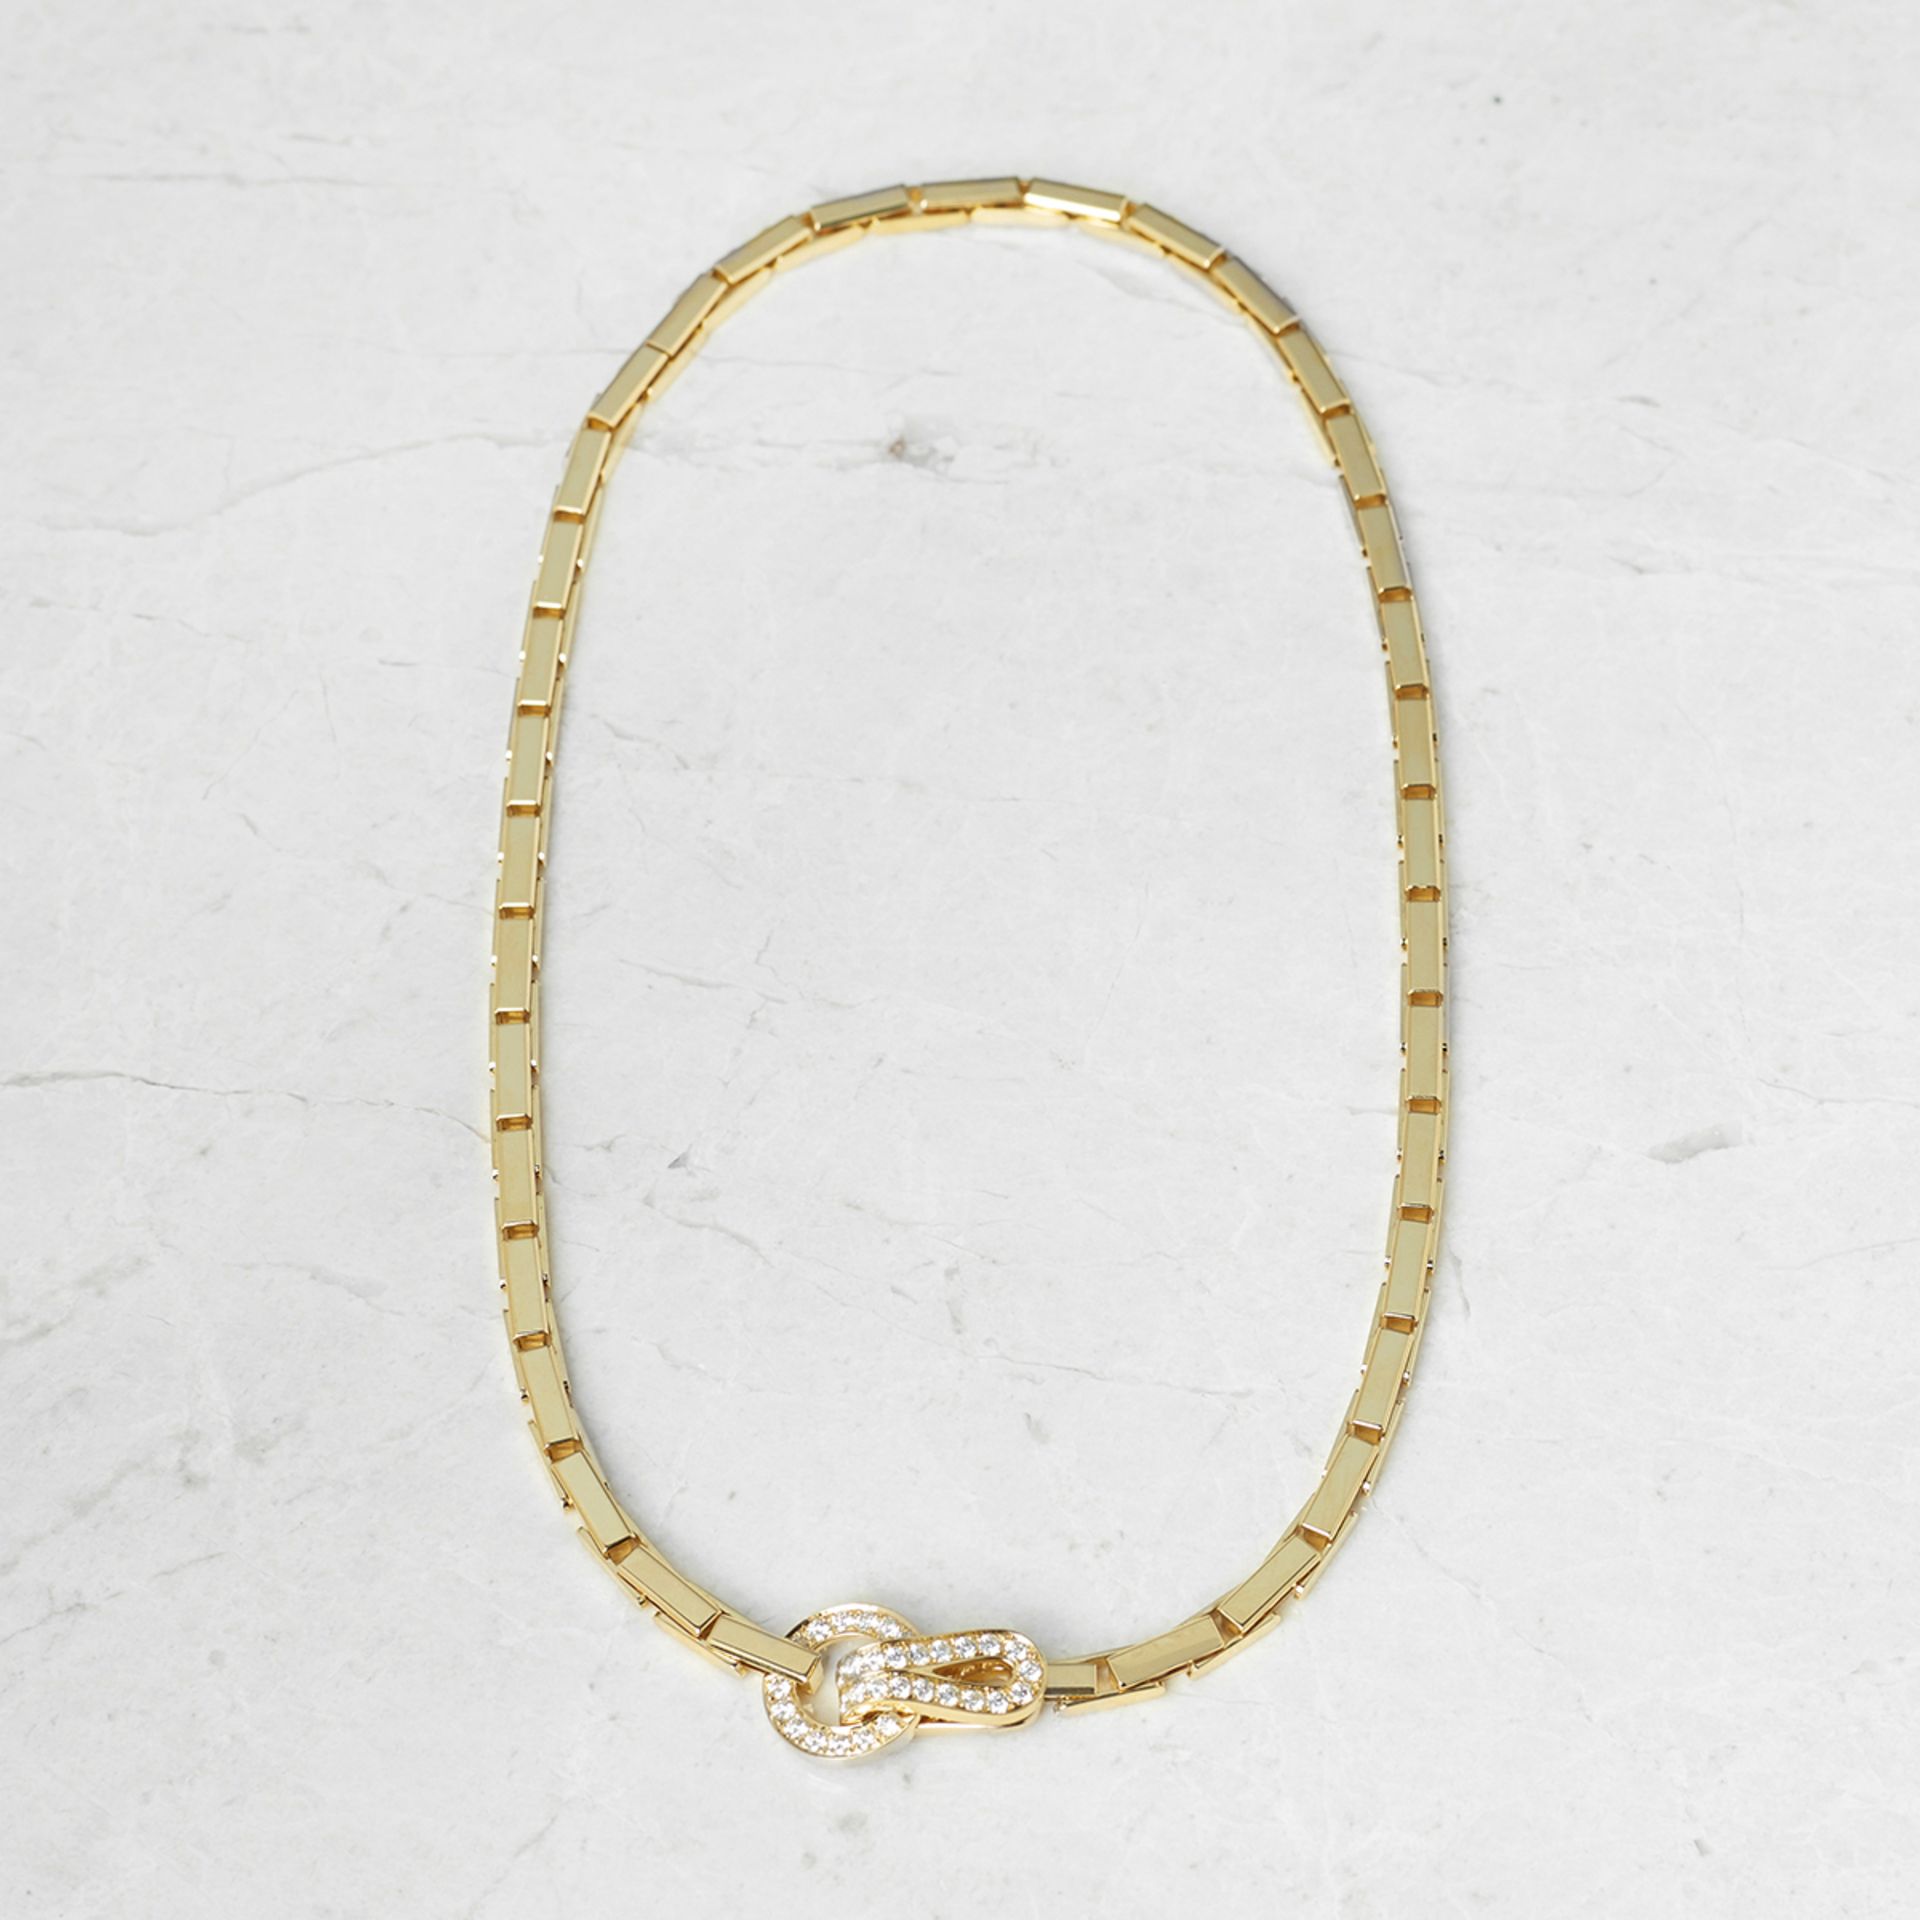 Cartier, 18k Yellow Gold Diamond Agrafe Necklace - Image 4 of 5